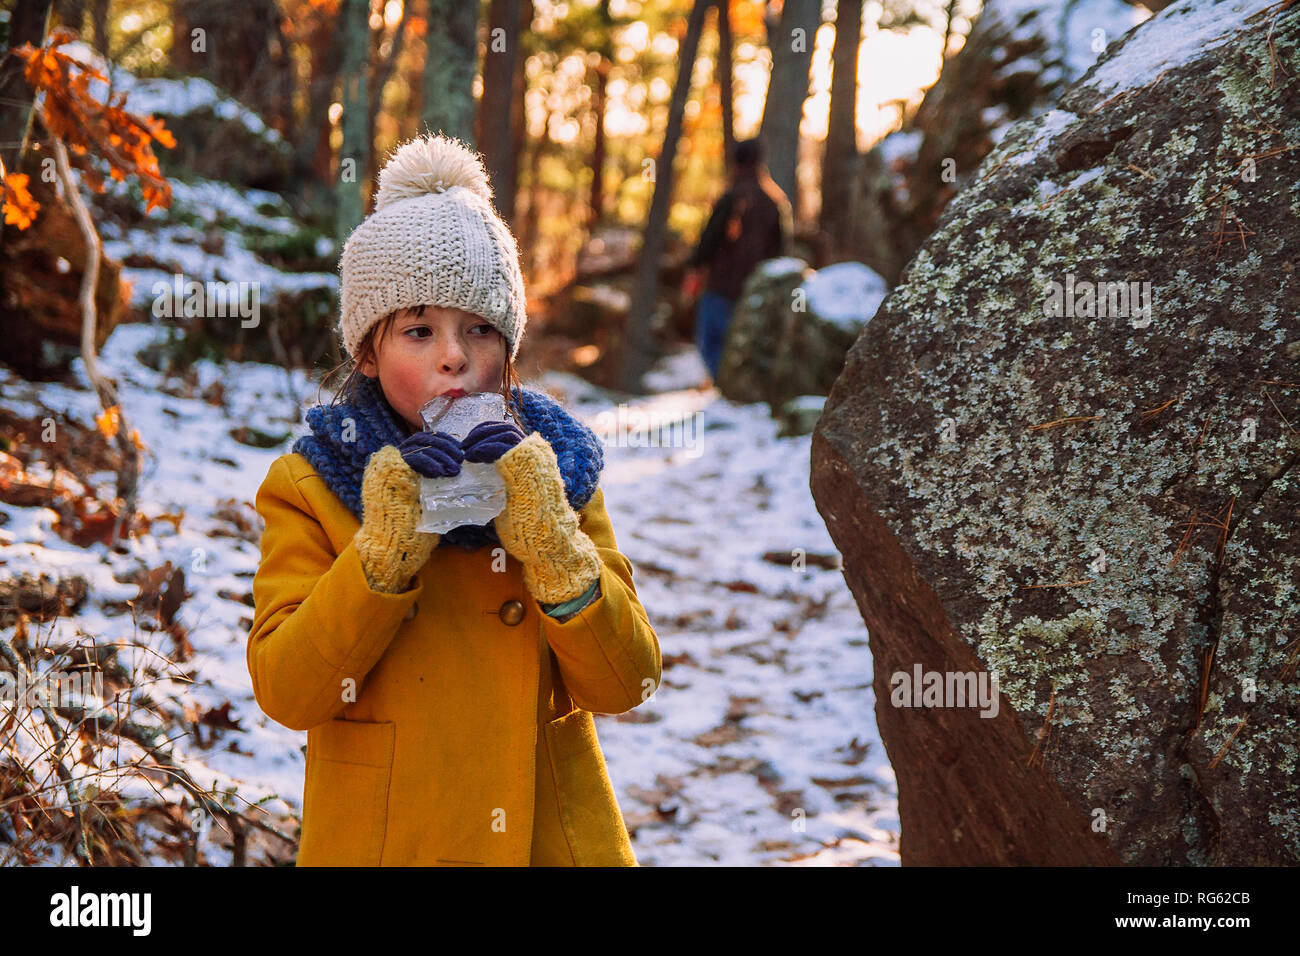 Girl standing in the forest eating a piece of ice, United States Stock Photo